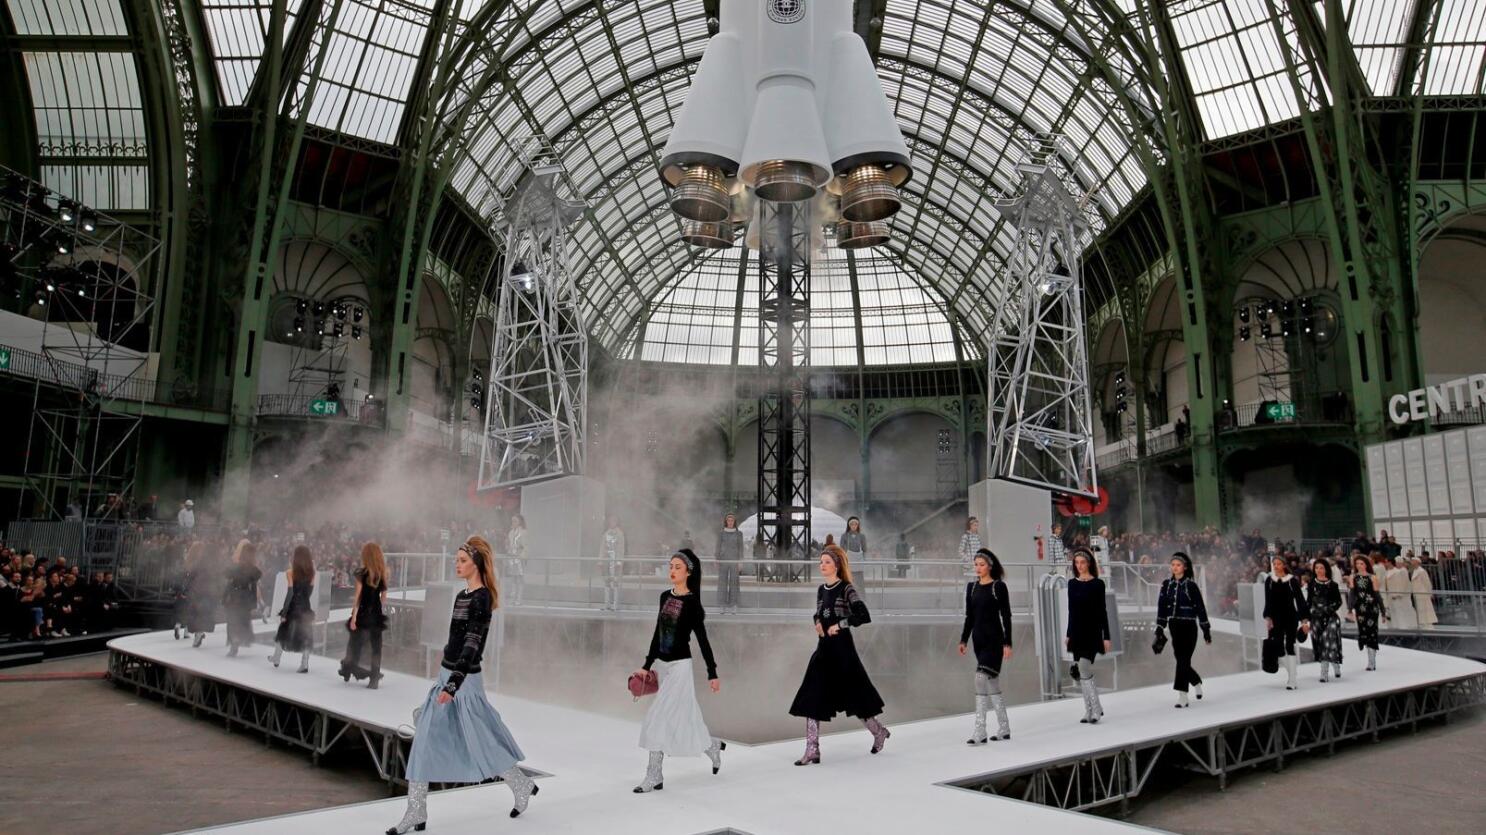 On the final day of Paris Fashion Week, the Chanel runway is a